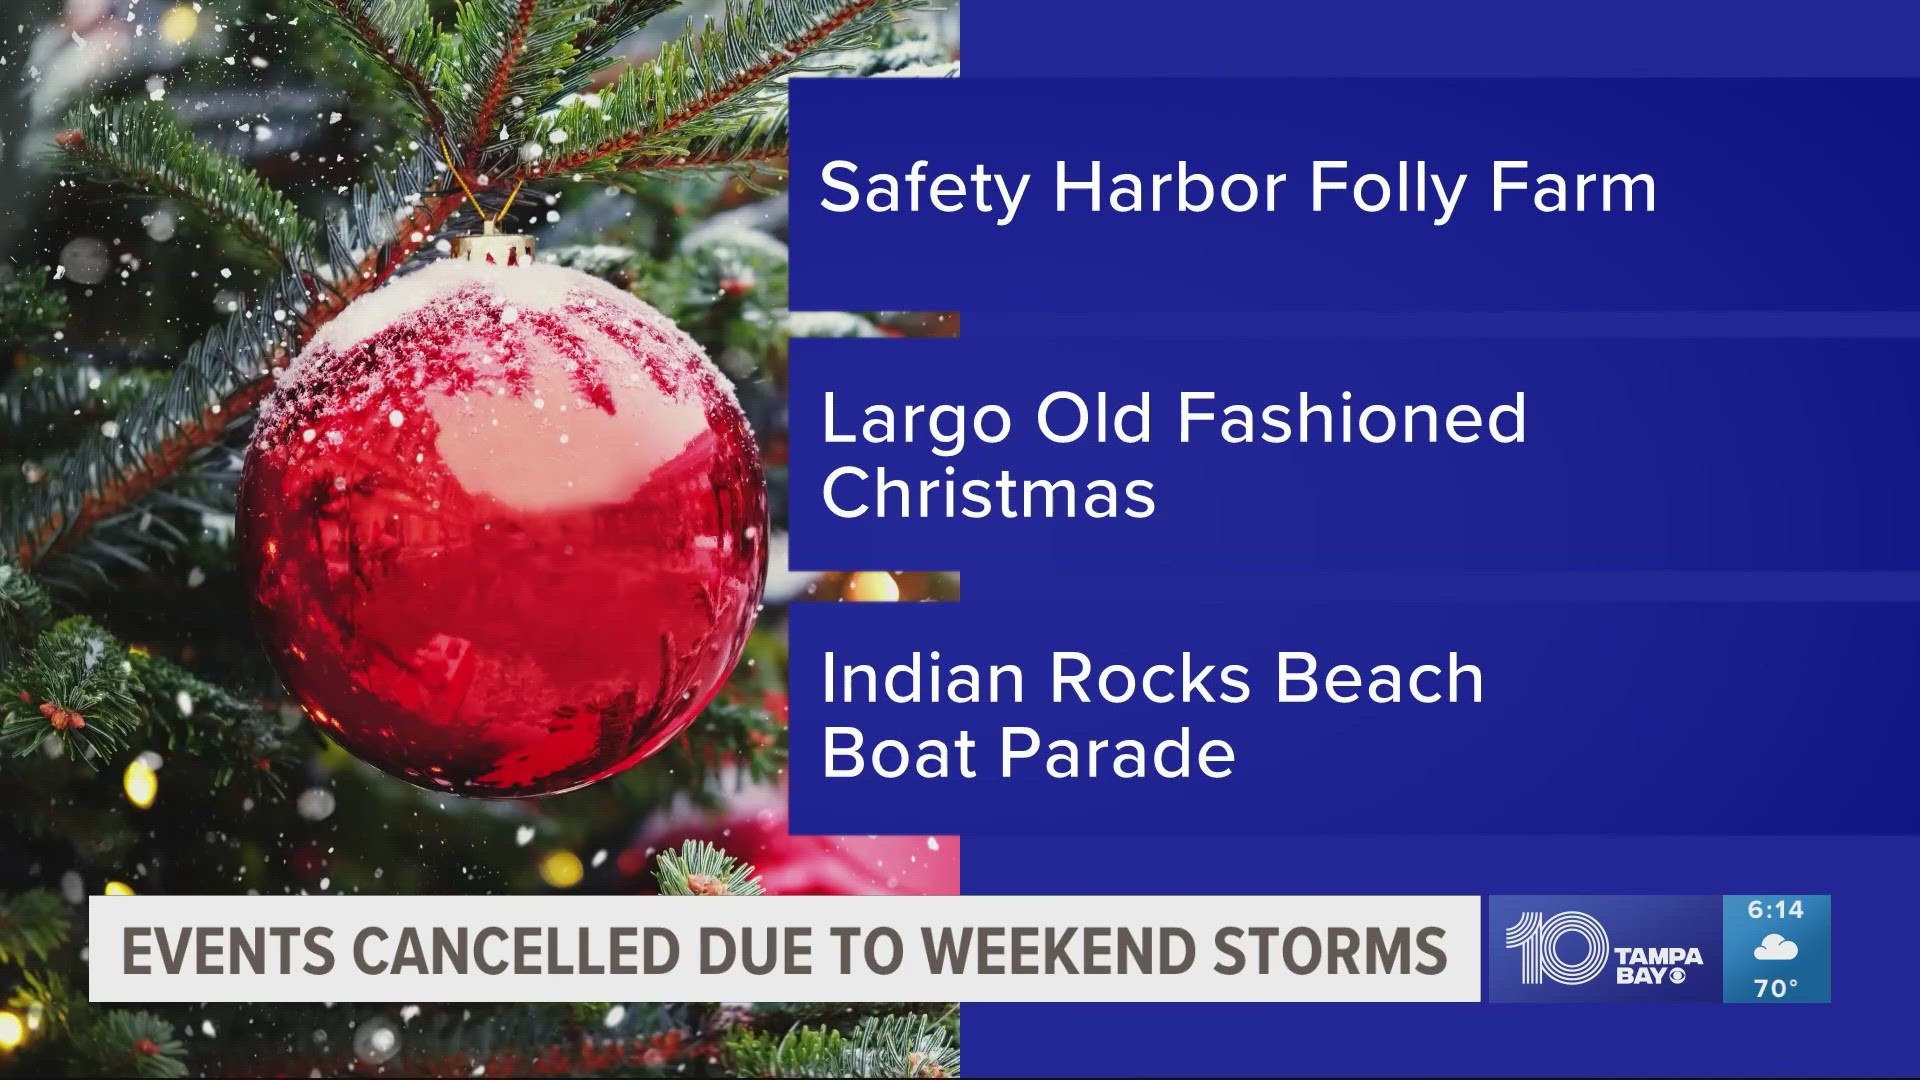 To ensure everyone stays safe and can have a fun time, the following events have been either canceled entirely or have been rescheduled to a later date.